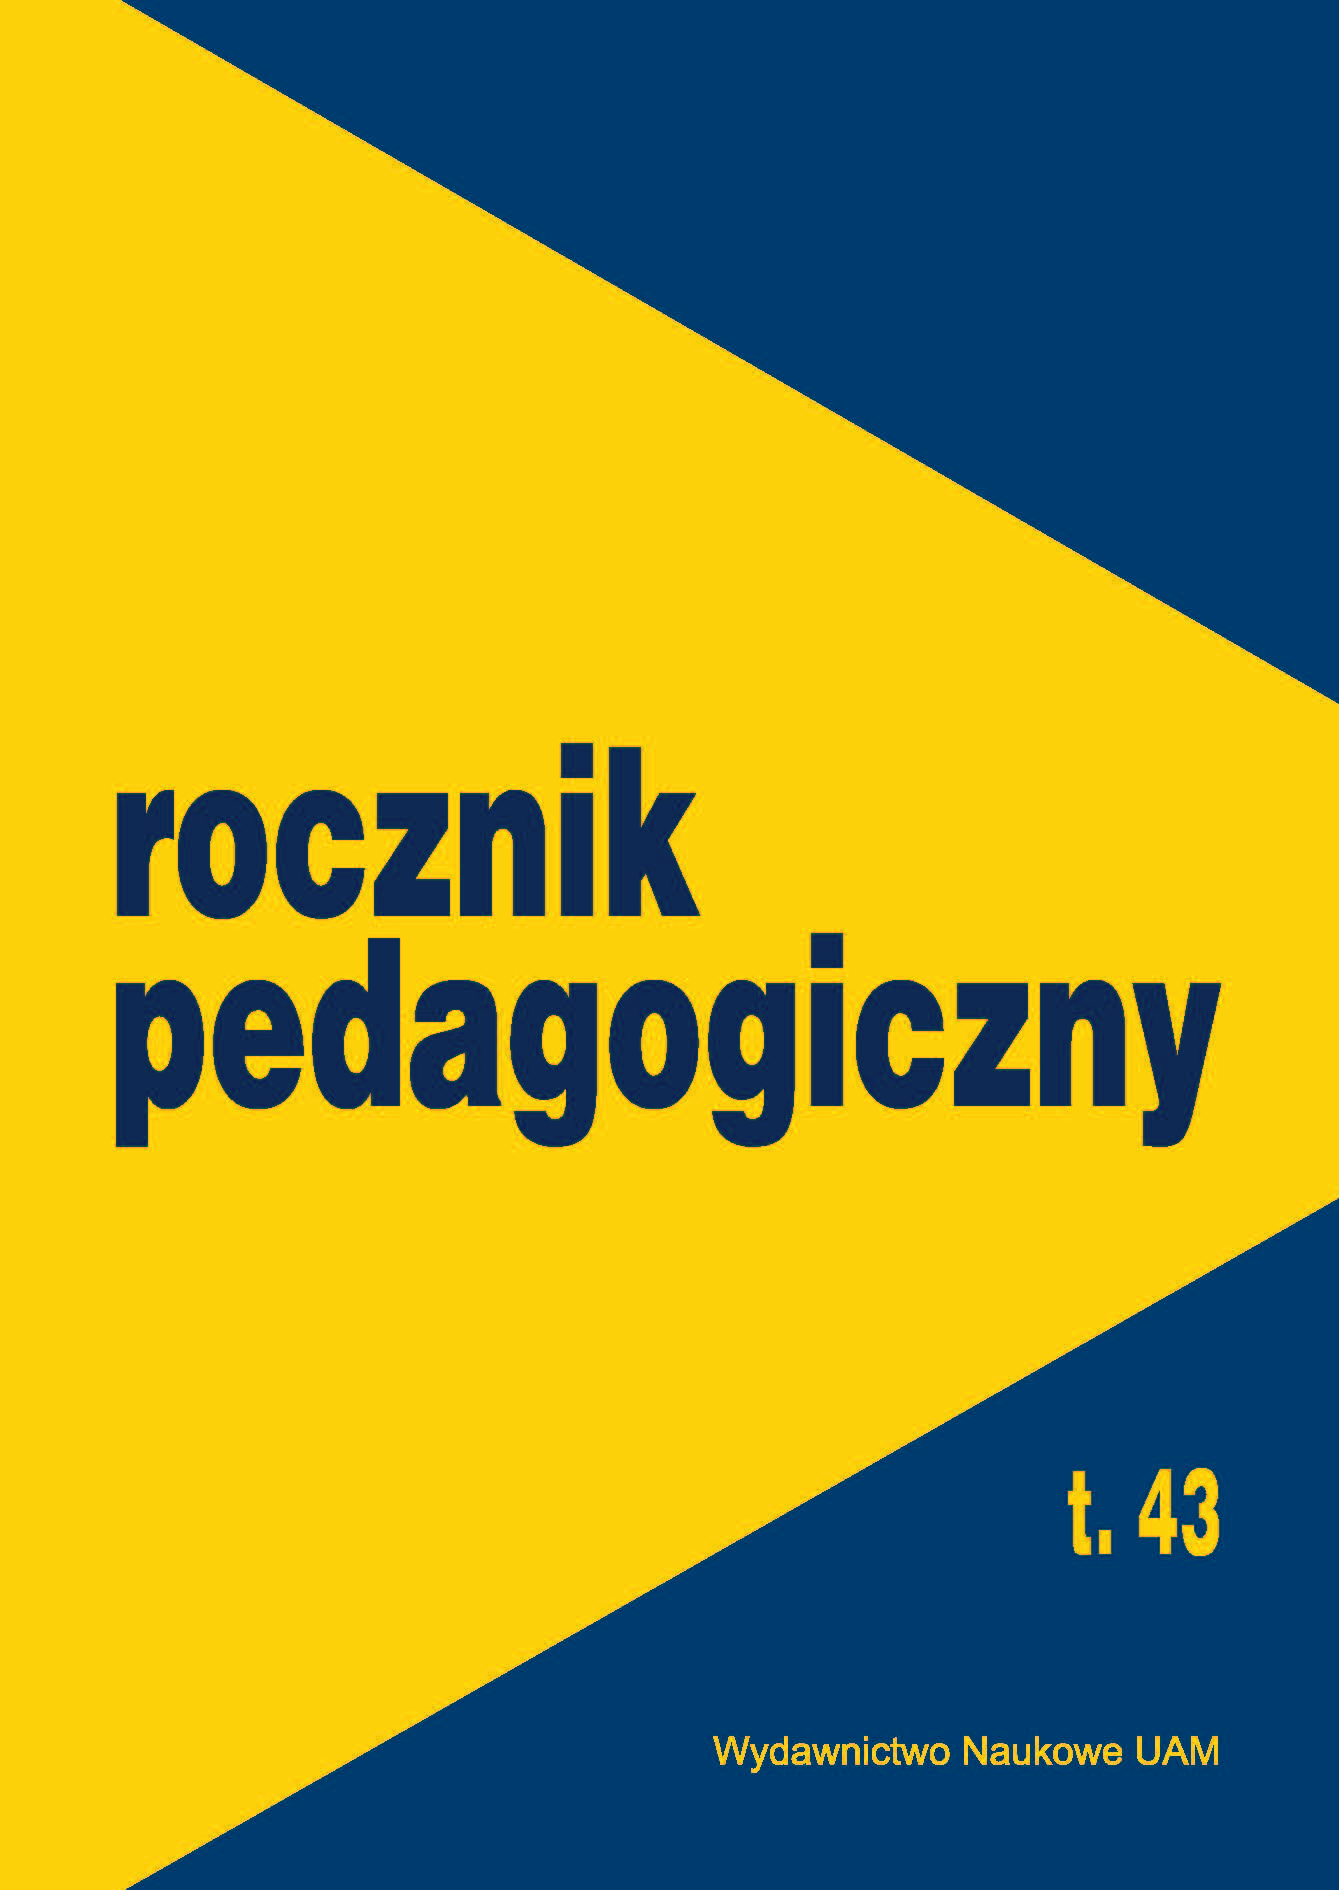 About Statistical Thinking in Pedagogics. On the Margin of the Reading of Wiesław
Szymczak’s book The practice of Statistical Inference Cover Image